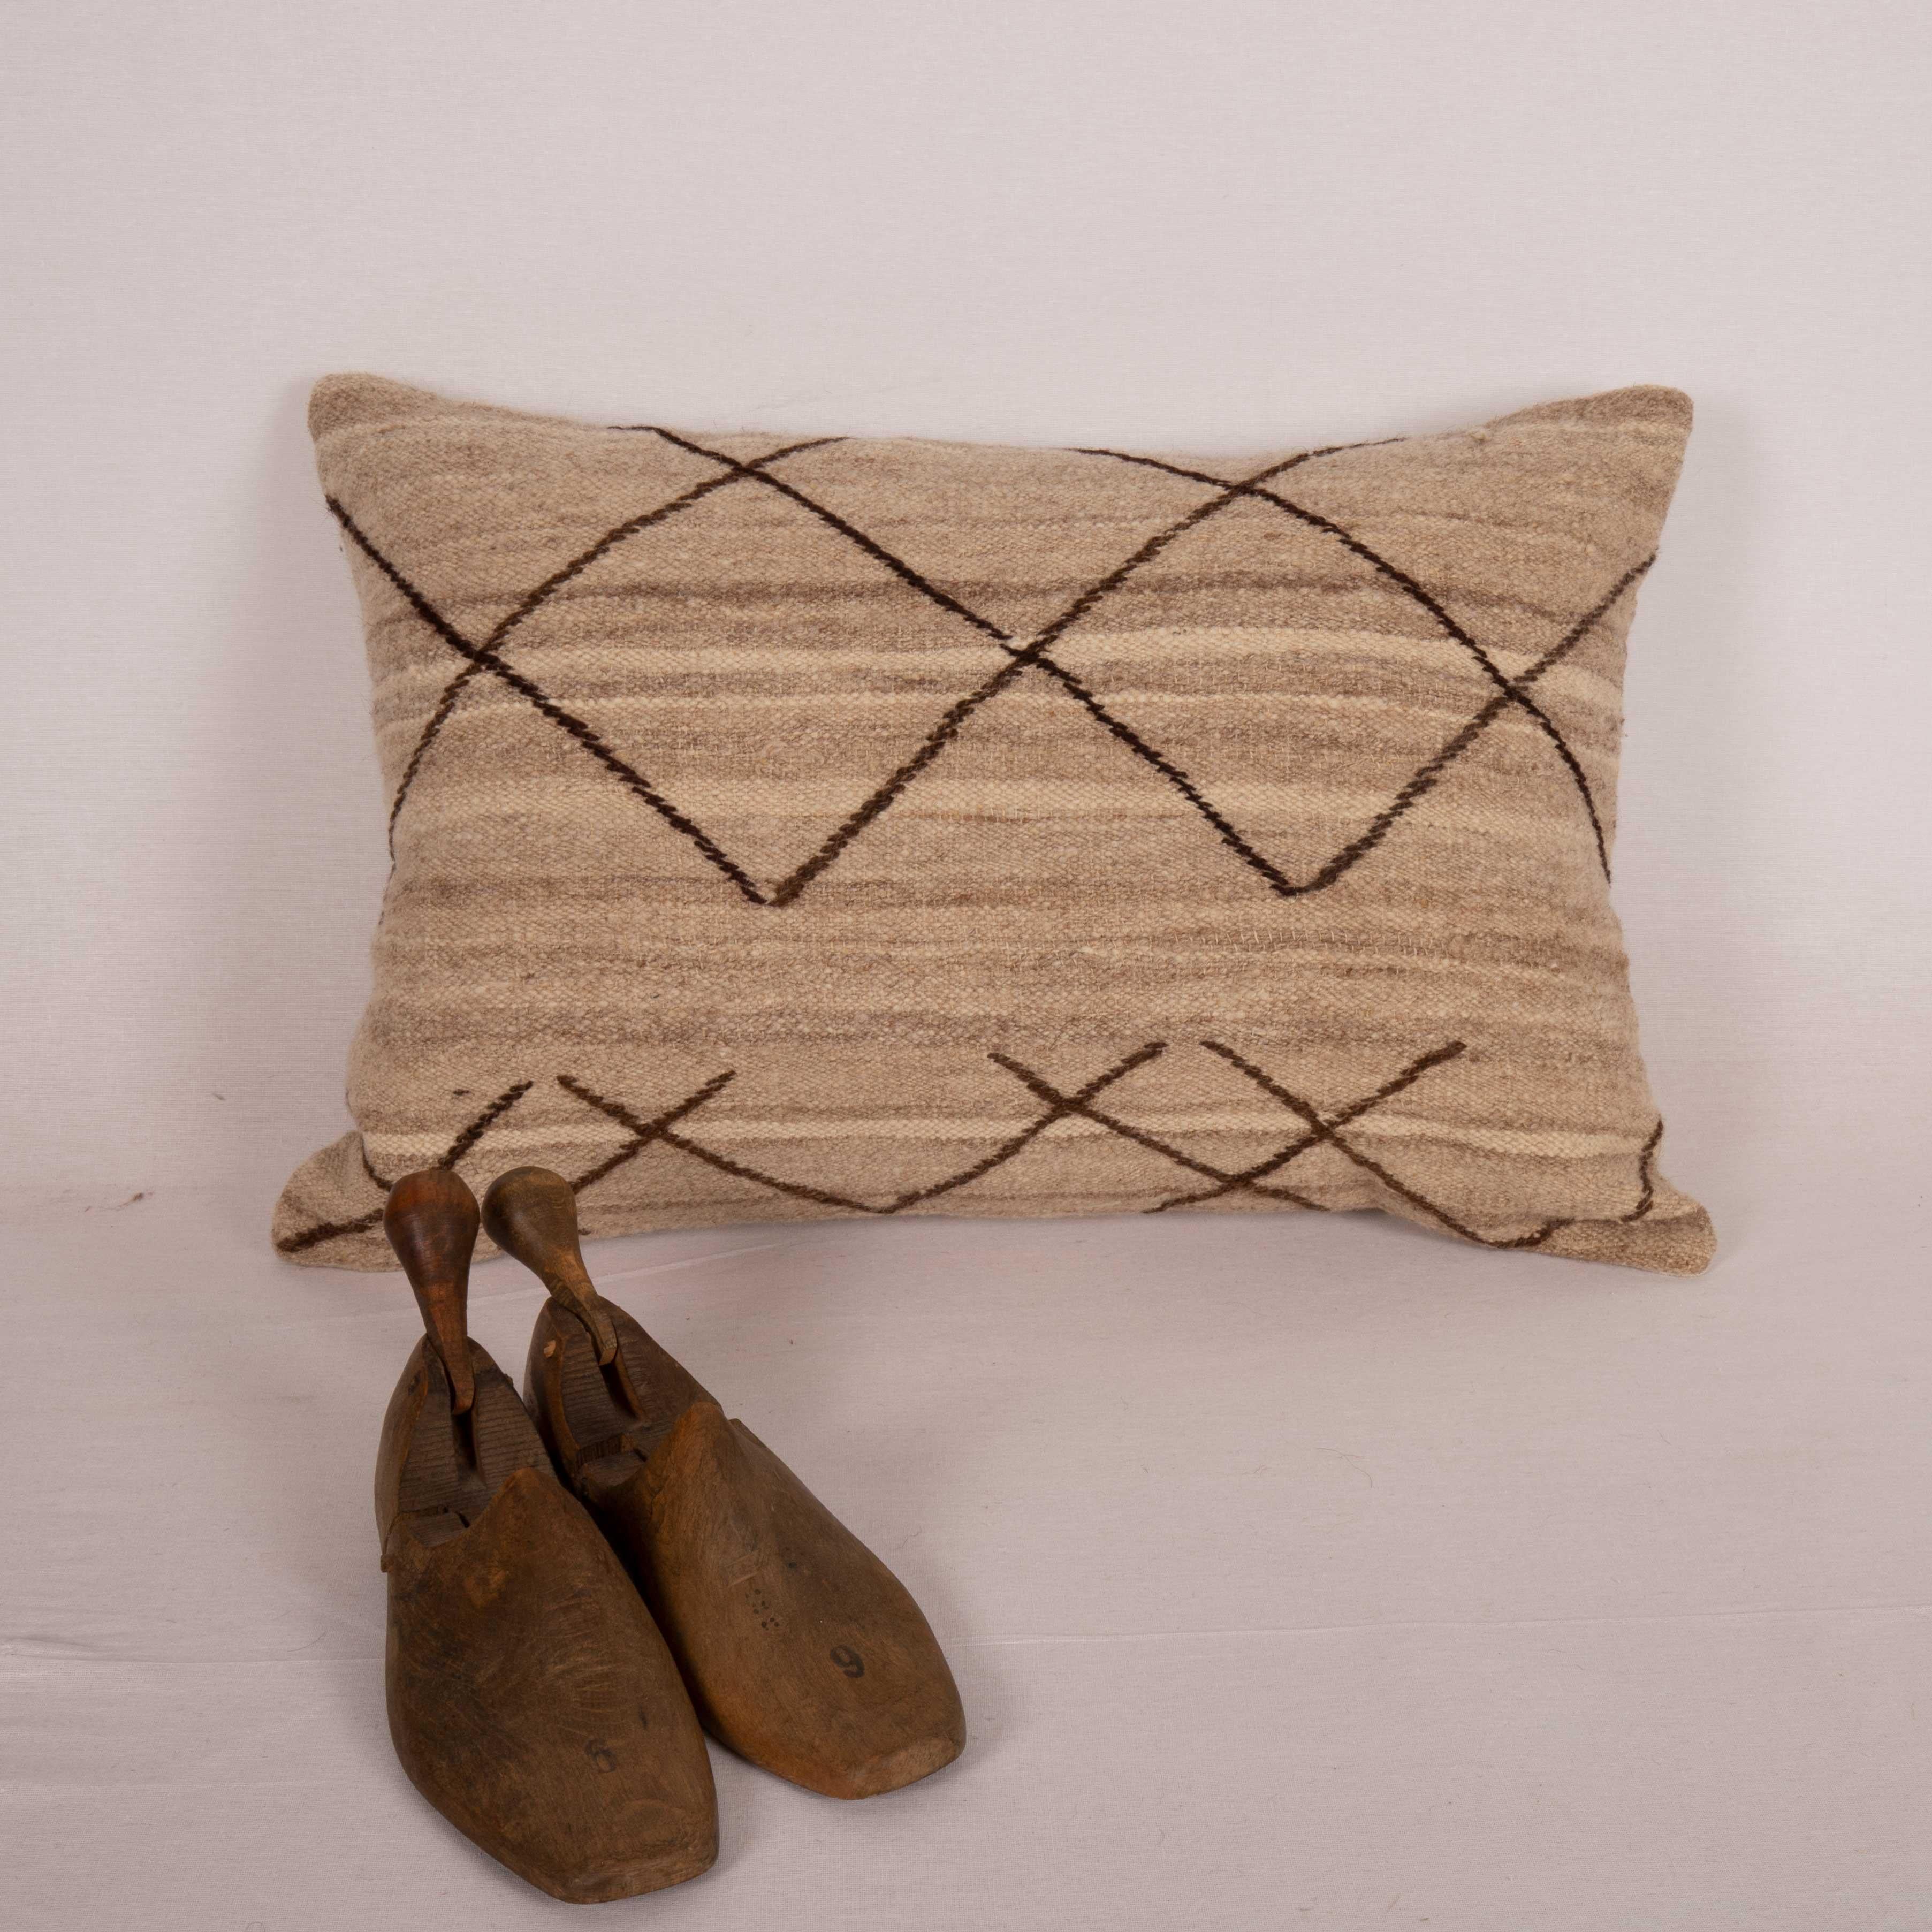 Neutral Pillow Case Made from a Vintage Wool Cover, Mid-20th C In Good Condition For Sale In Istanbul, TR